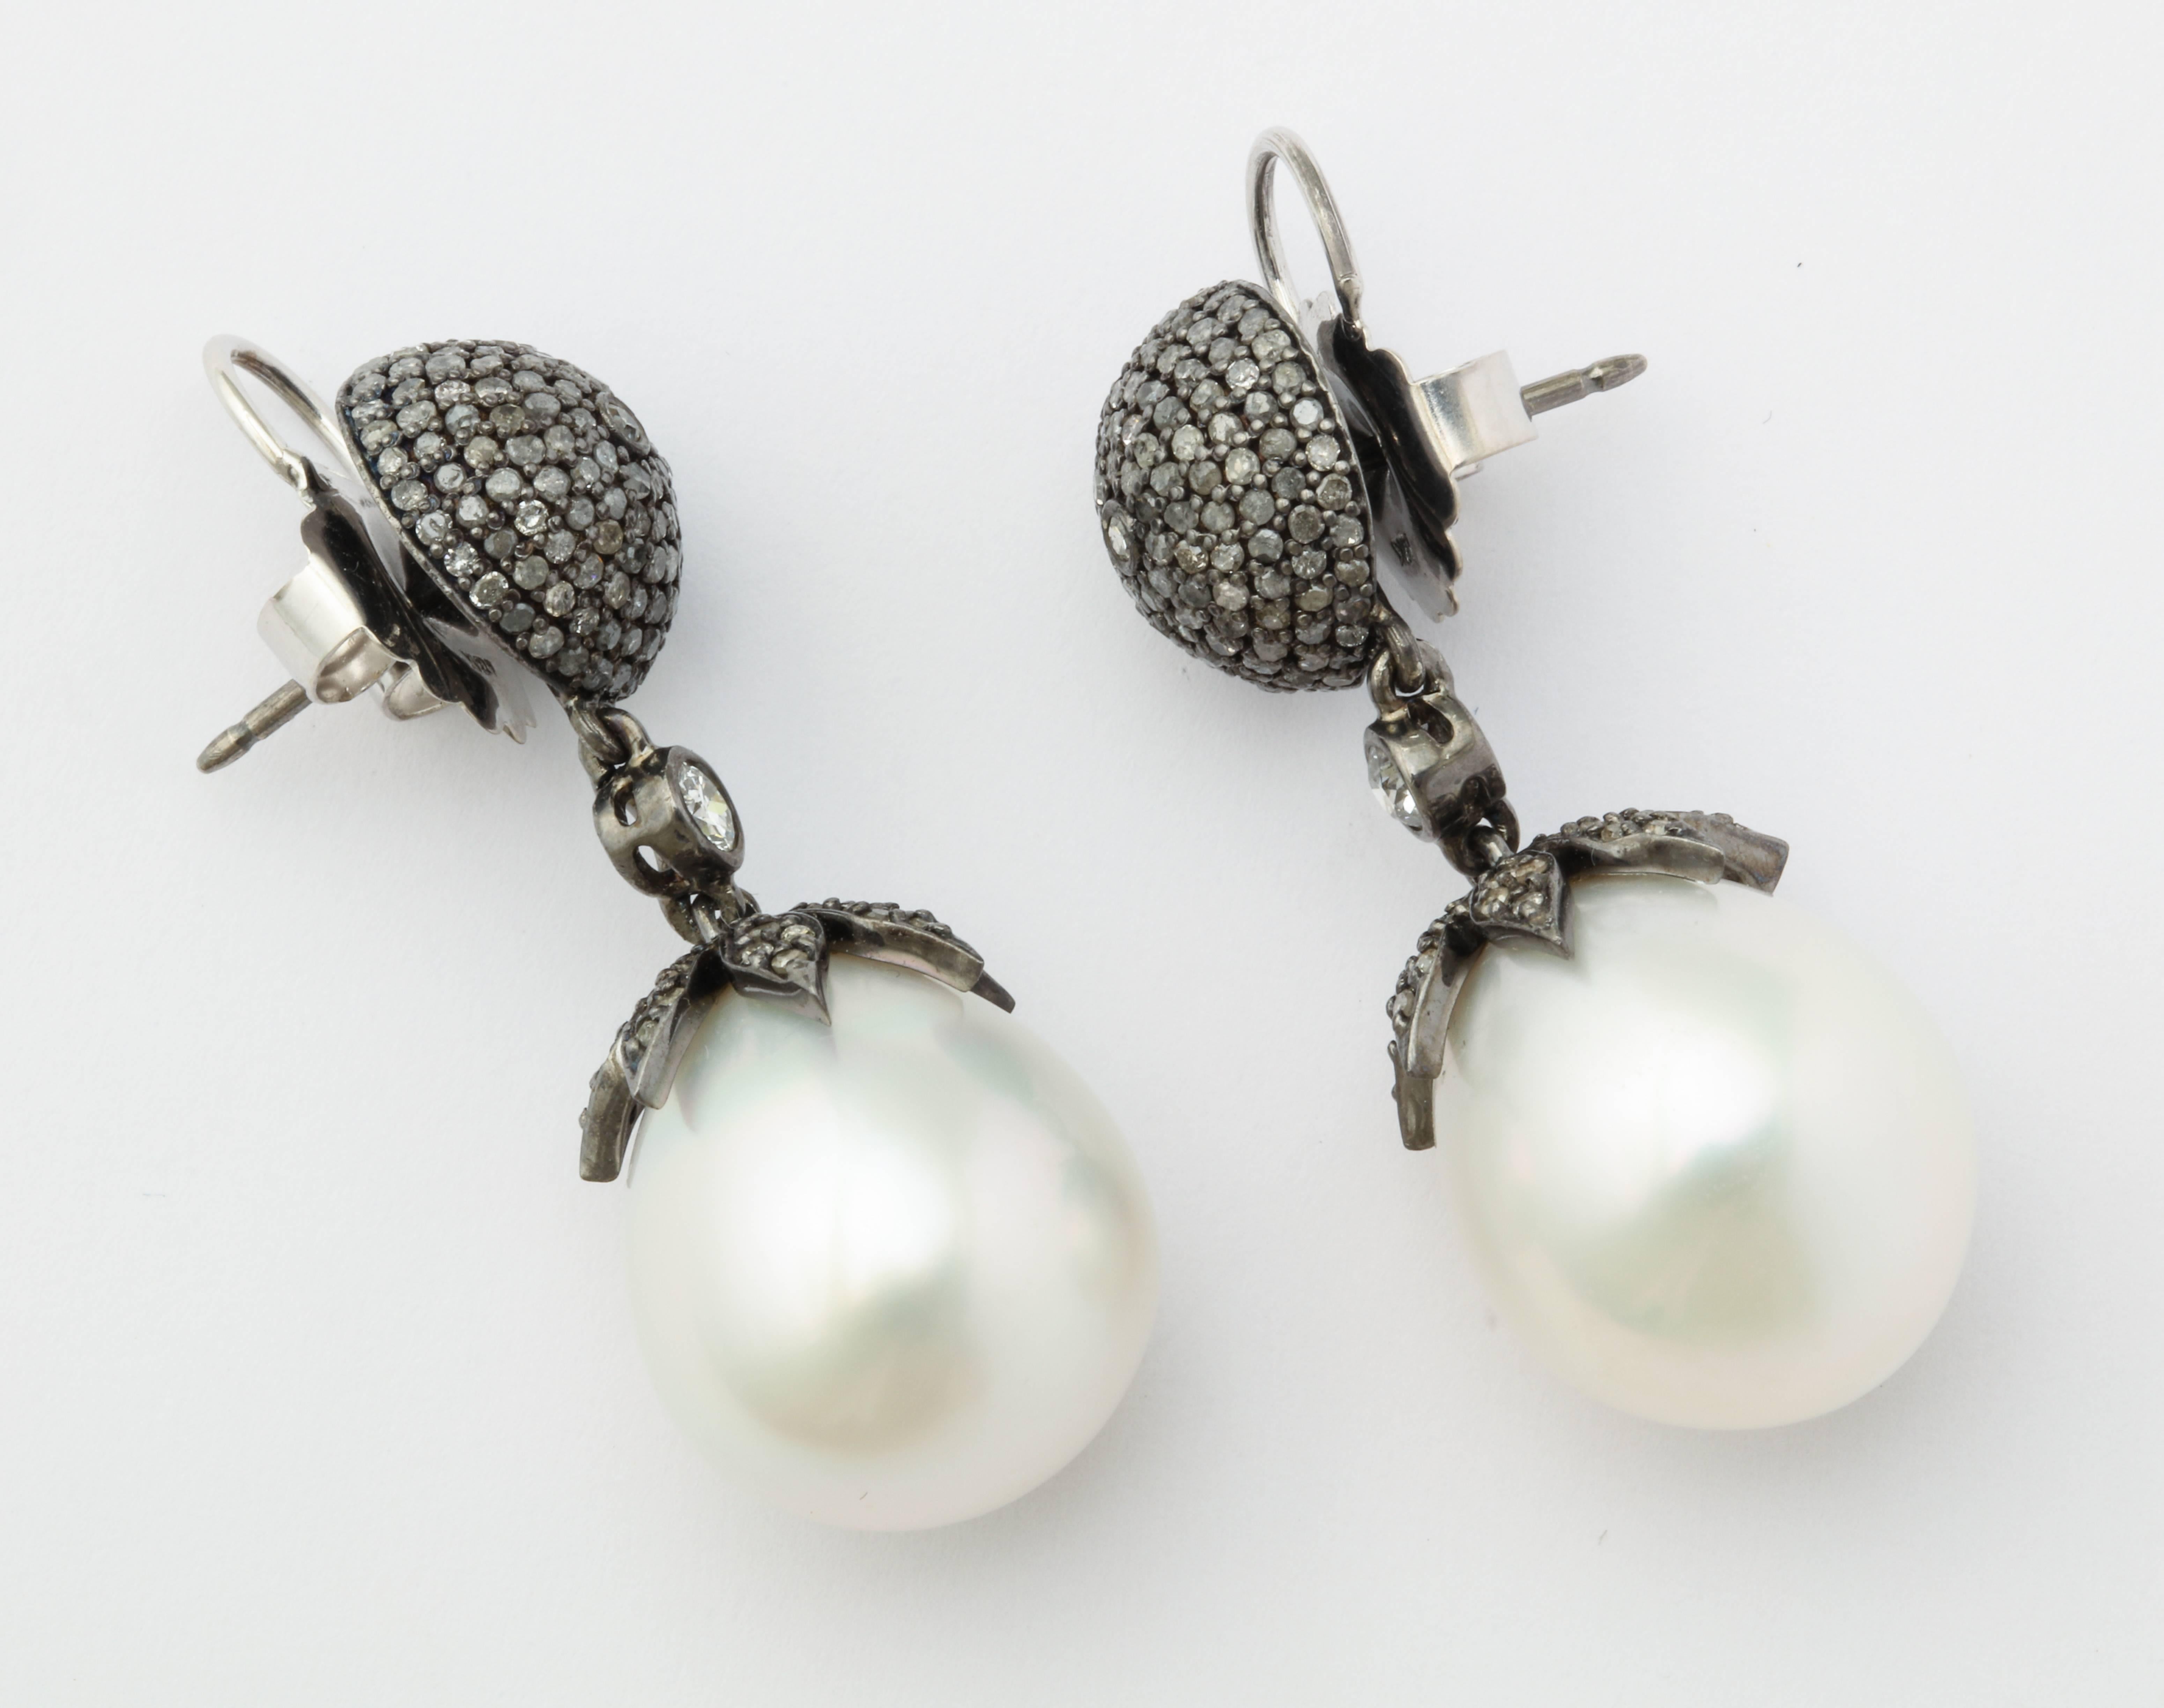 A smart day into night earring featuring bright white, high luster south sea cultured pearl drops suspended from a dramatic grey and white diamond button created with antiqued silver finish cap and 18K WG friction backs and posts.